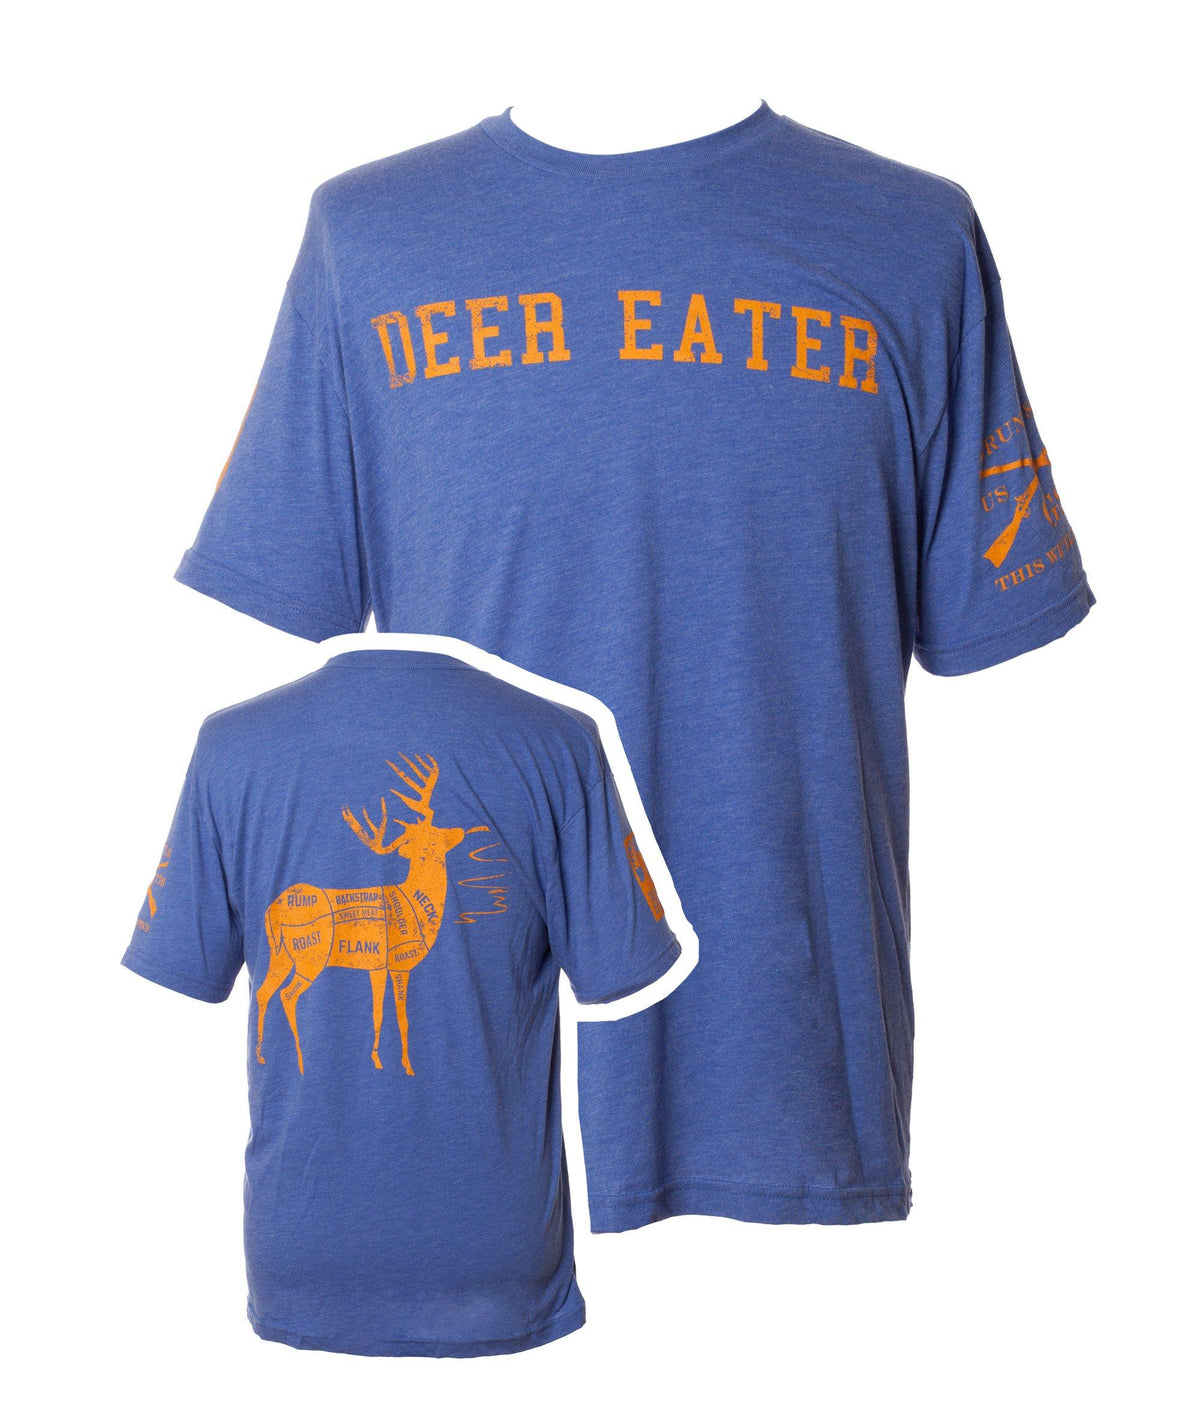 Limited Edition Youth Grunt Style Deer Eater Shirt – Big and J